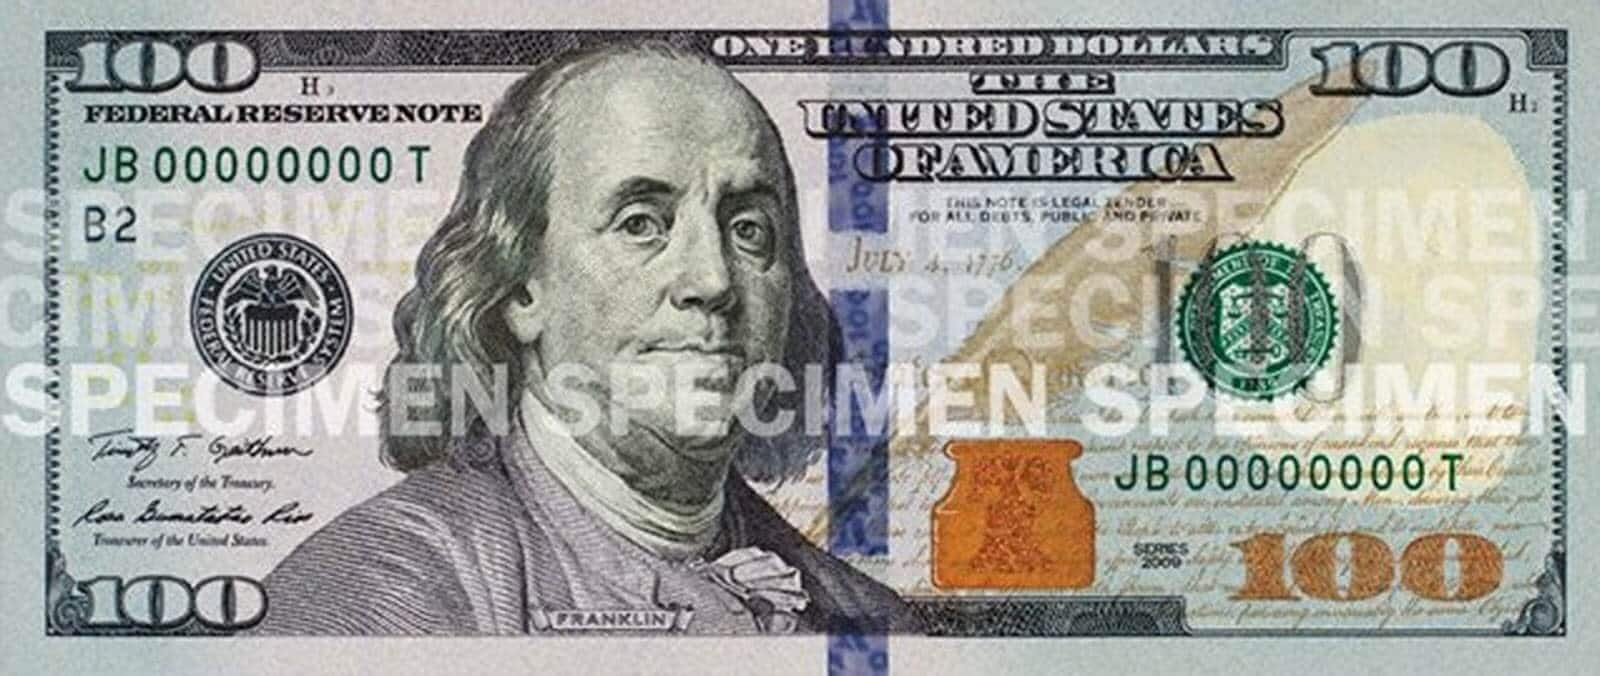 Are old $100 bills still accepted in US?